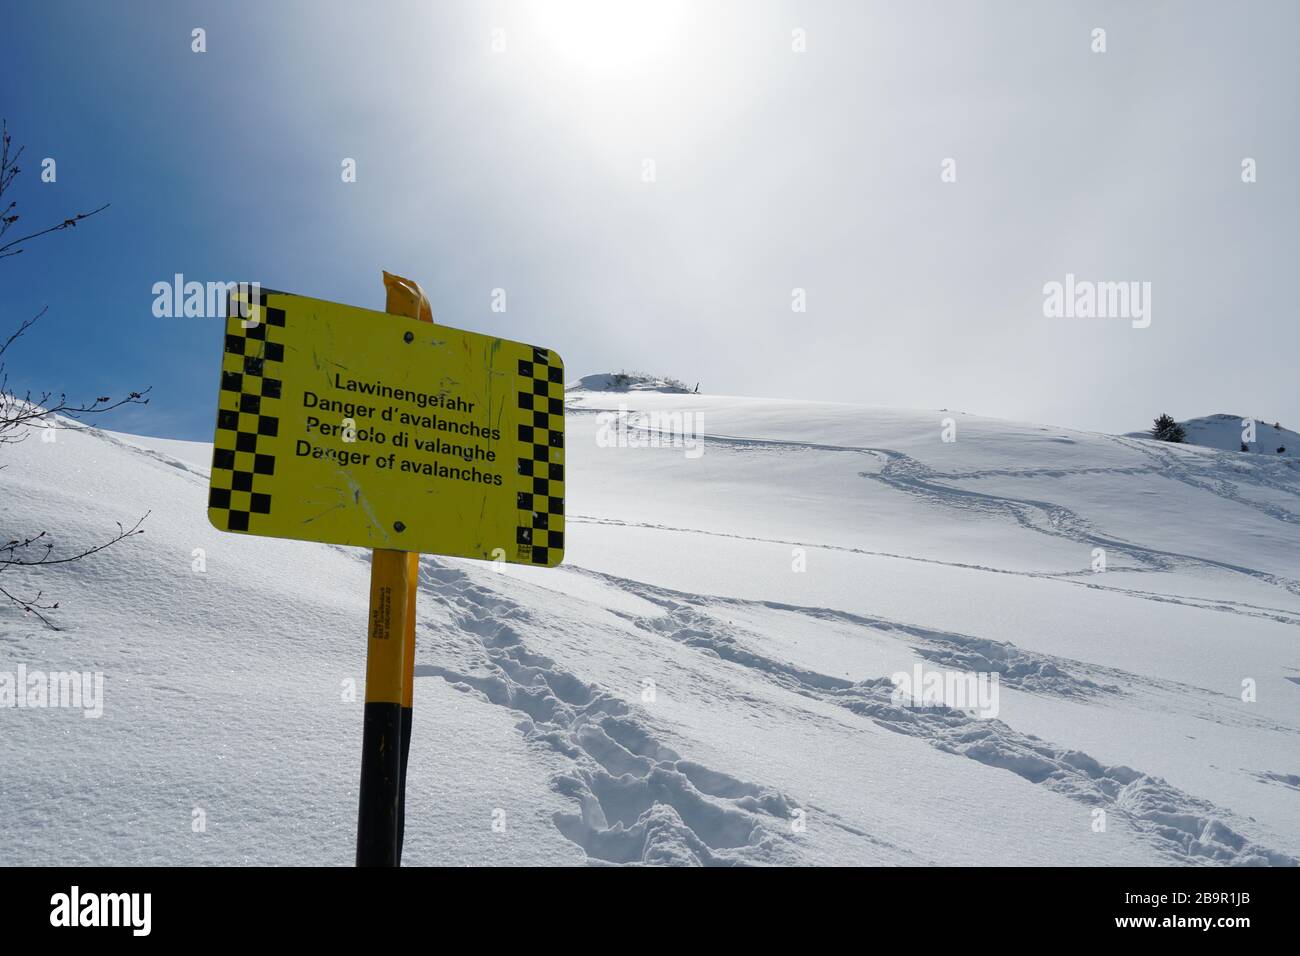 A sign post or signpost warning from avalanches in German, French, Italian and English, in skiing resort, Hoch Ybrig in Switzerland Stock Photo